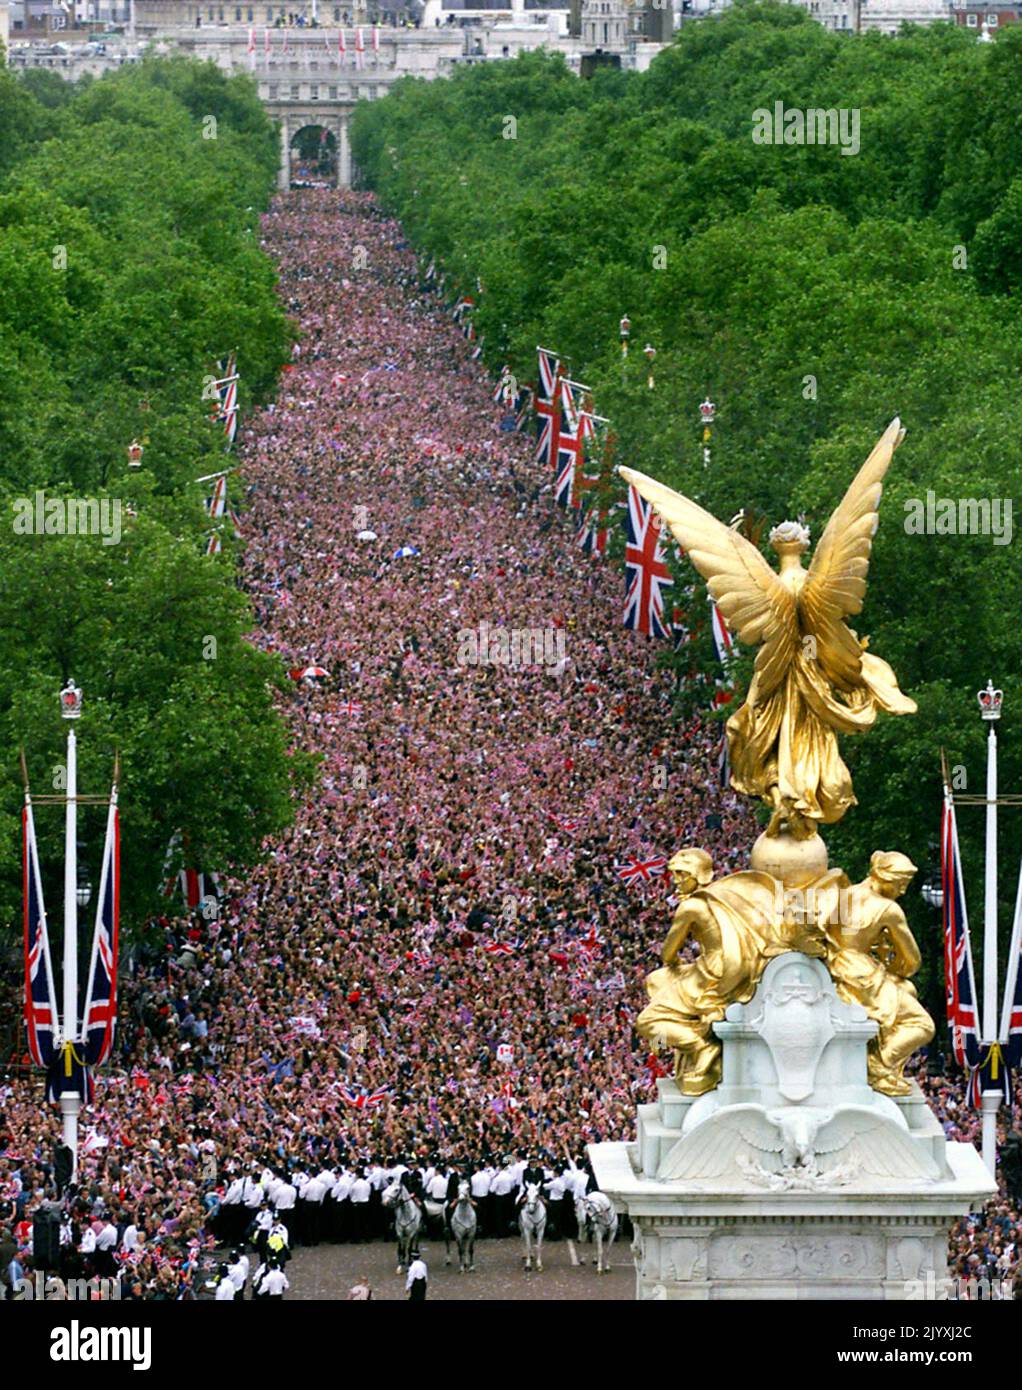 File photo dated 4/6/2002 of the scene from the roof of Buckingham Palace as crowds gathered to watch the Jubilee Flypast of 27 aircraft including the Red Arrows and Concorde fly above The Mall to mark the Queen's Golden Jubilee in the largest formation flight over London since 1981. The Queen toured the UK during her Golden Jubilee year – but 2002 also saw the death of both her sister and her mother. Doubters had insisted the Golden Jubilee would be a flop – the monarchy was no longer relevant and royalists should at last bow to the republicans, they argued. More than one million people turne Stock Photo